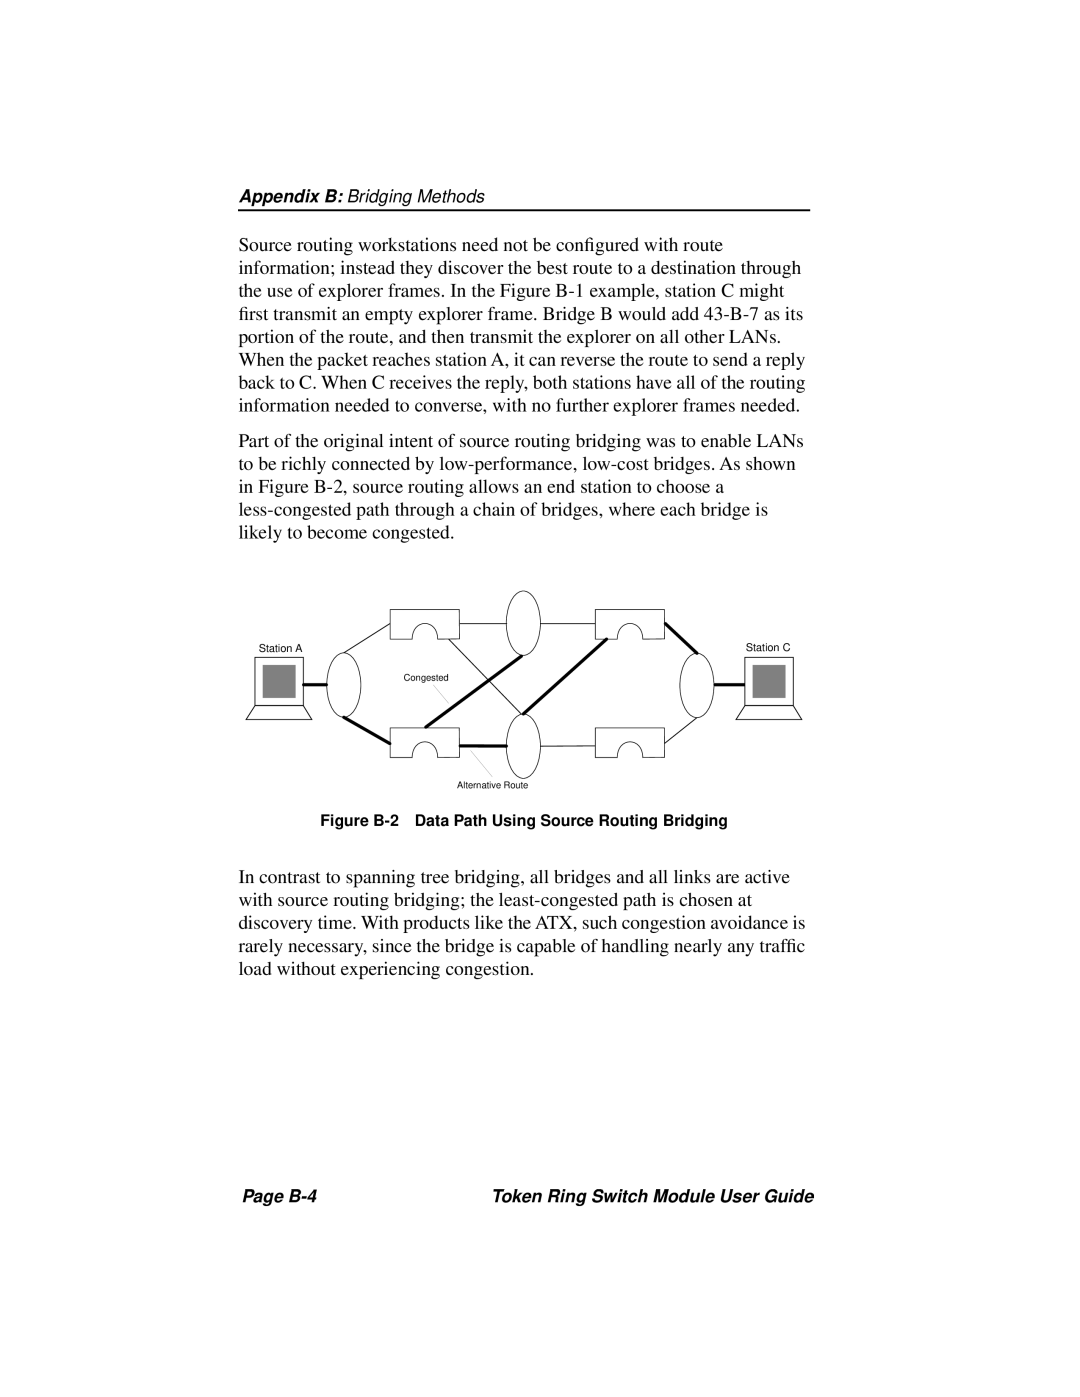 Cabletron Systems 3T02-04 manual Figure B-2 Data Path Using Source Routing Bridging, Station A, Station C 